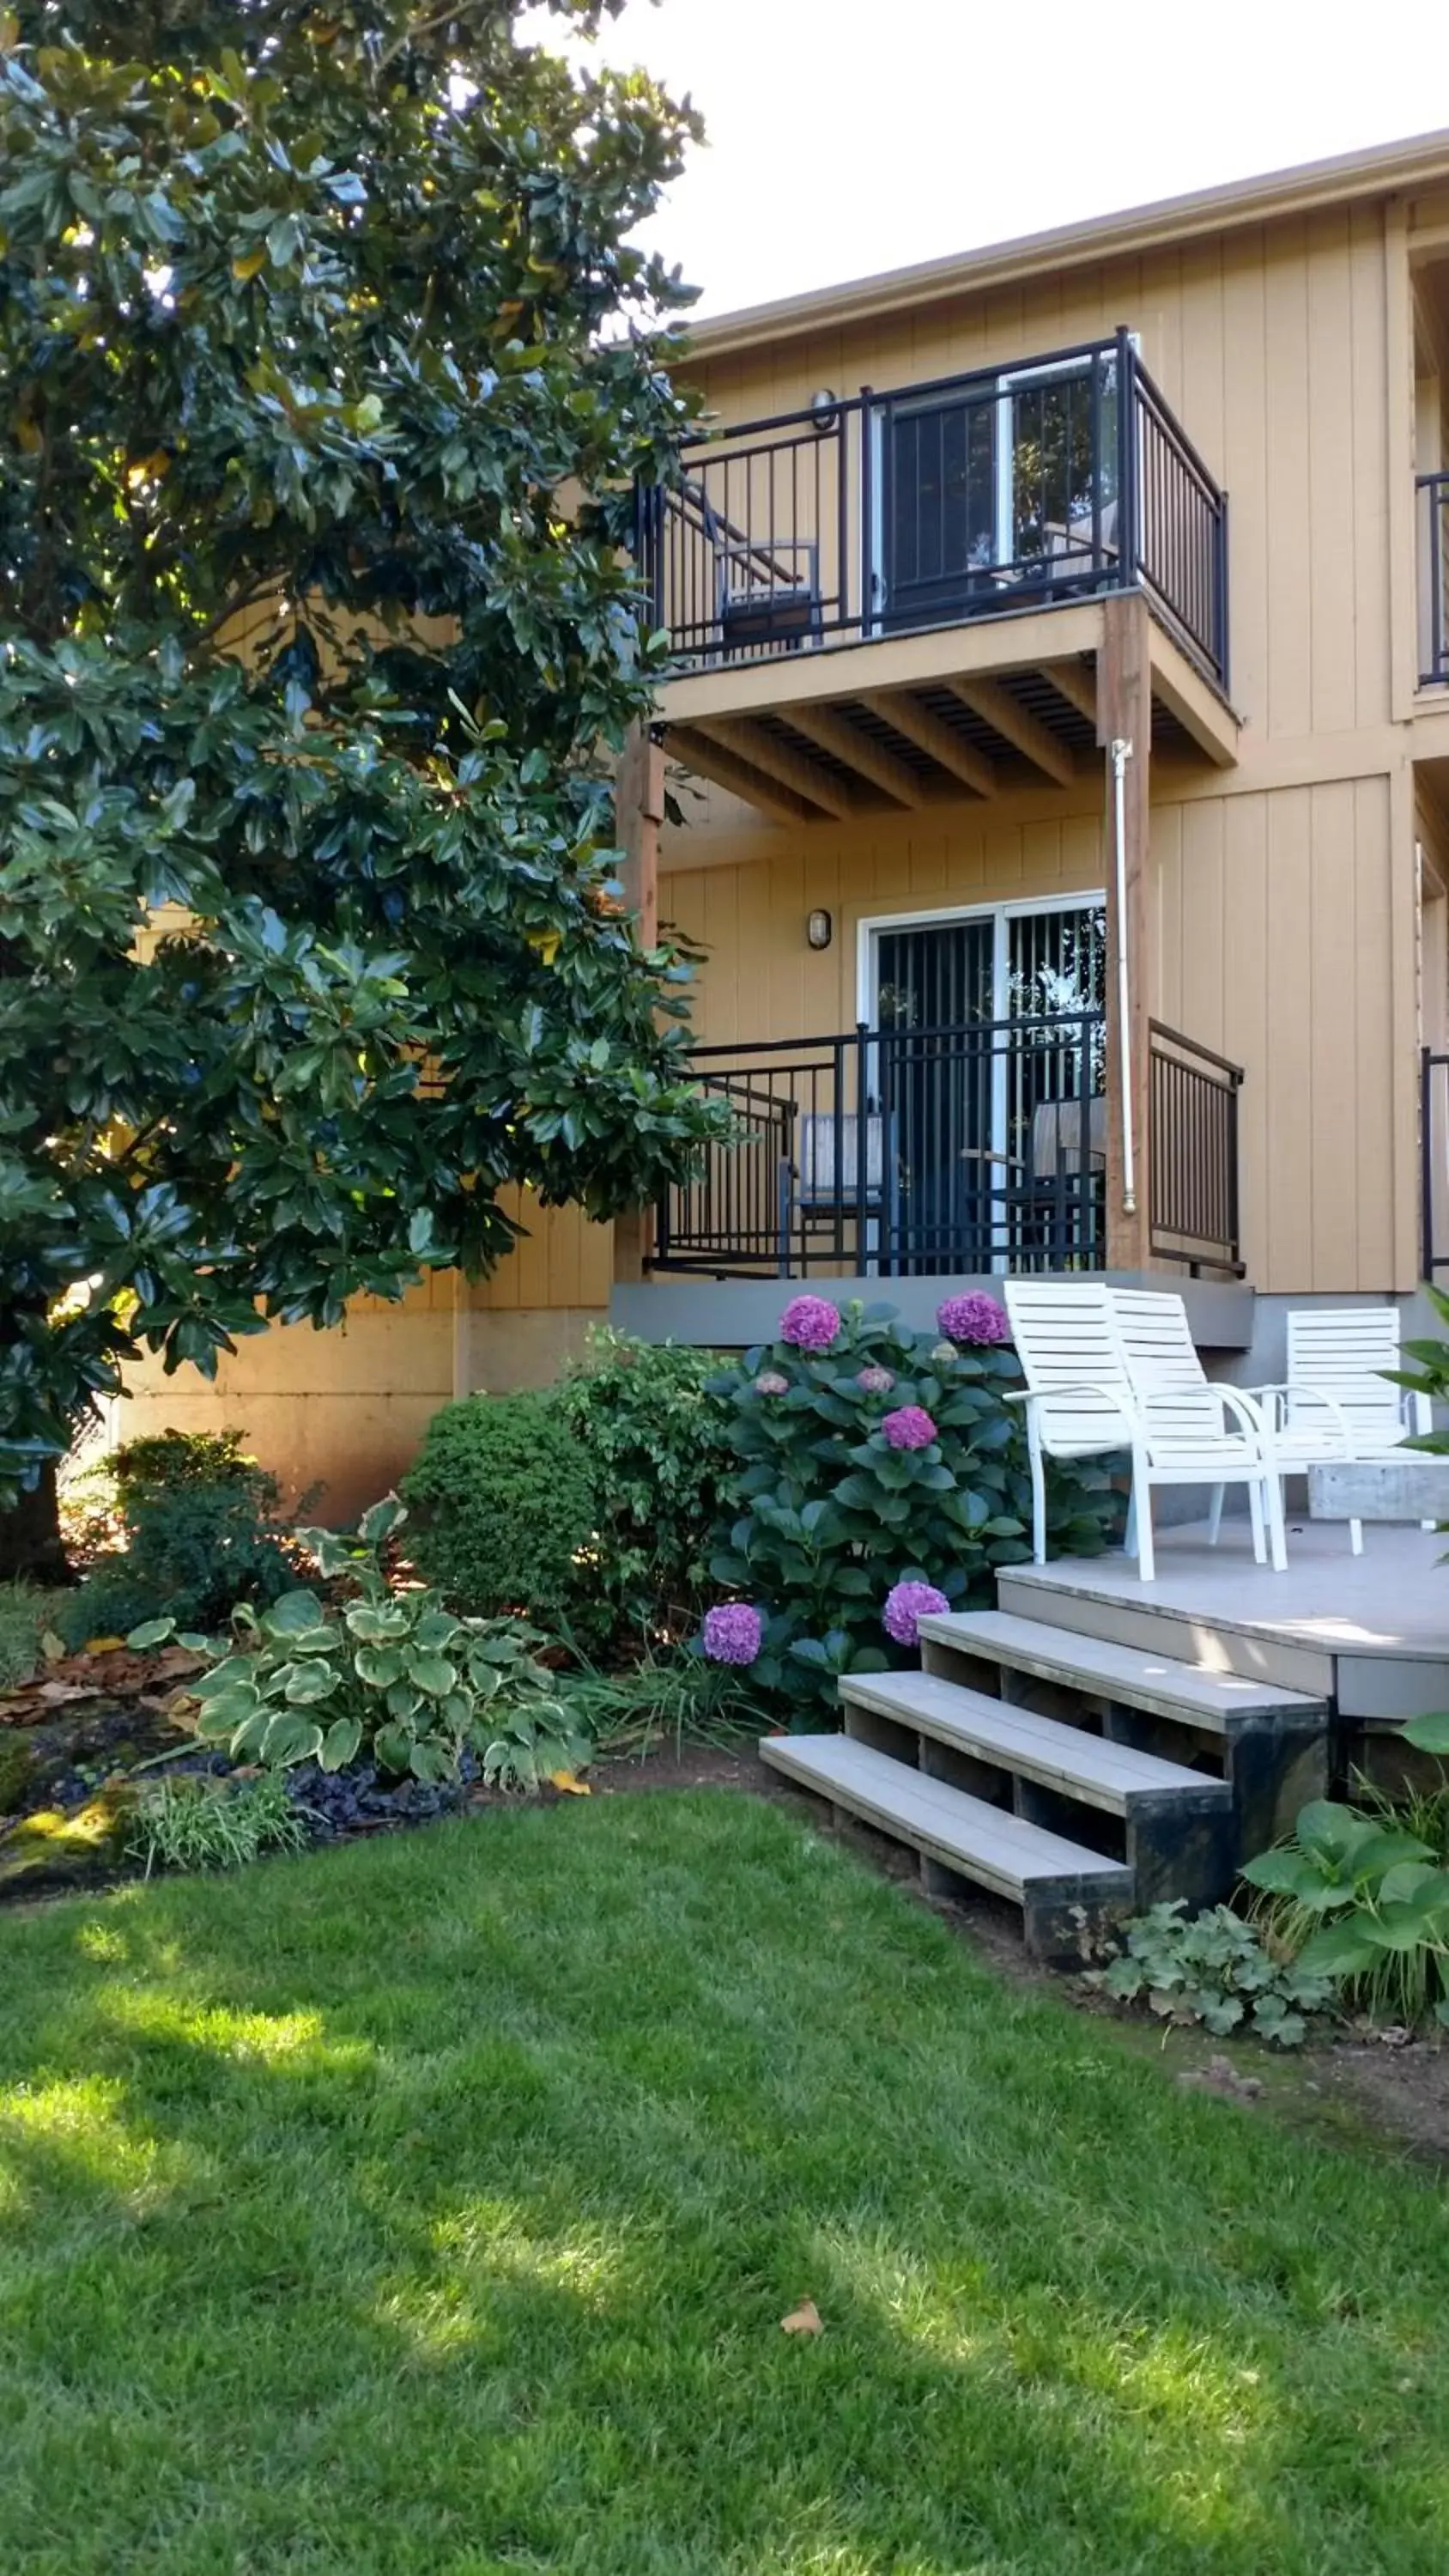 Property building, Patio/Outdoor Area in Lewis River Inn